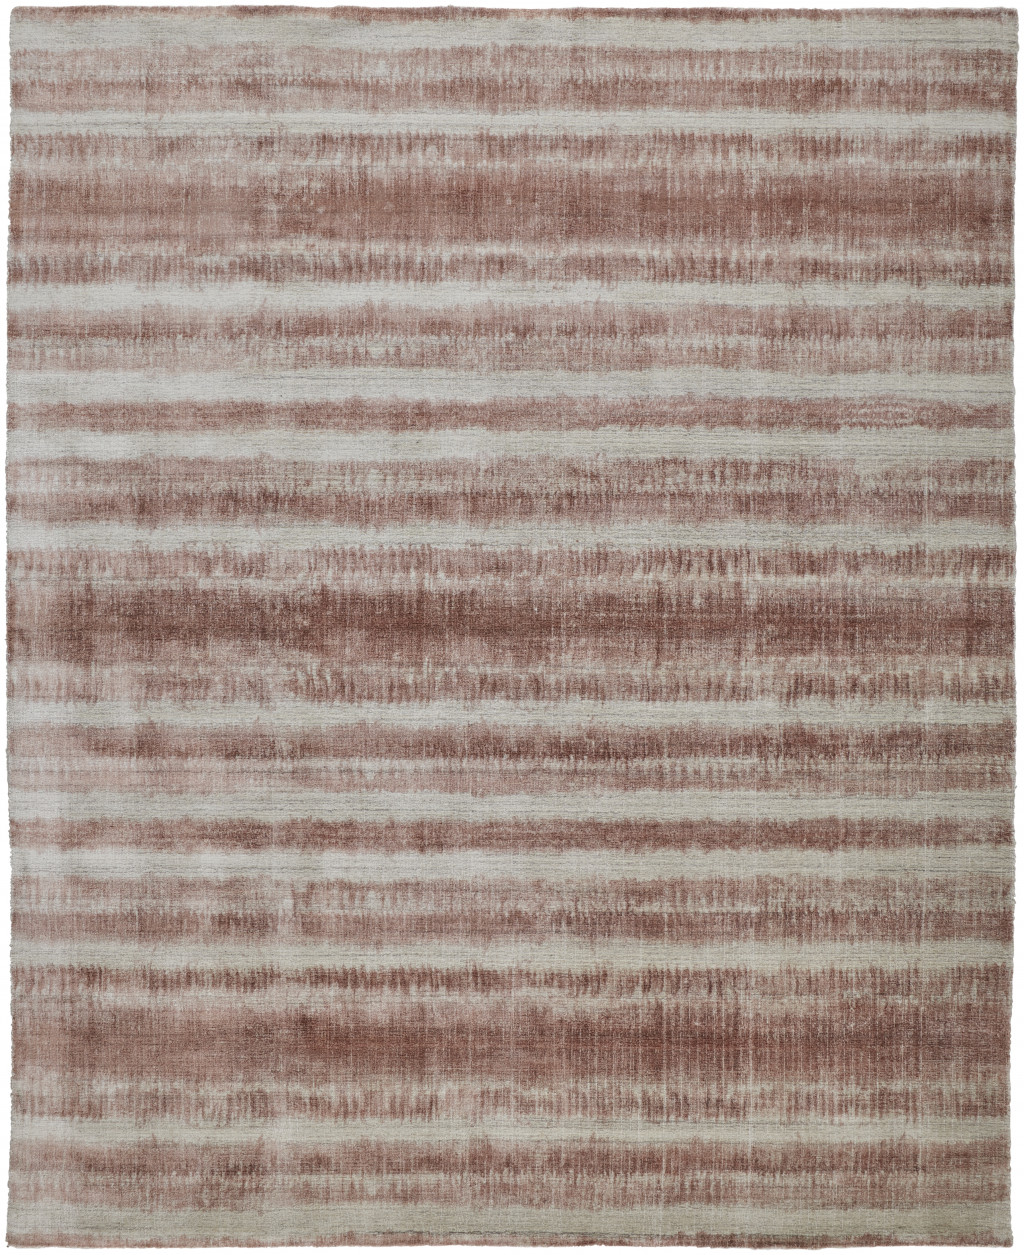 2' X 3' Tan Ivory And Pink Abstract Hand Woven Area Rug-514427-1